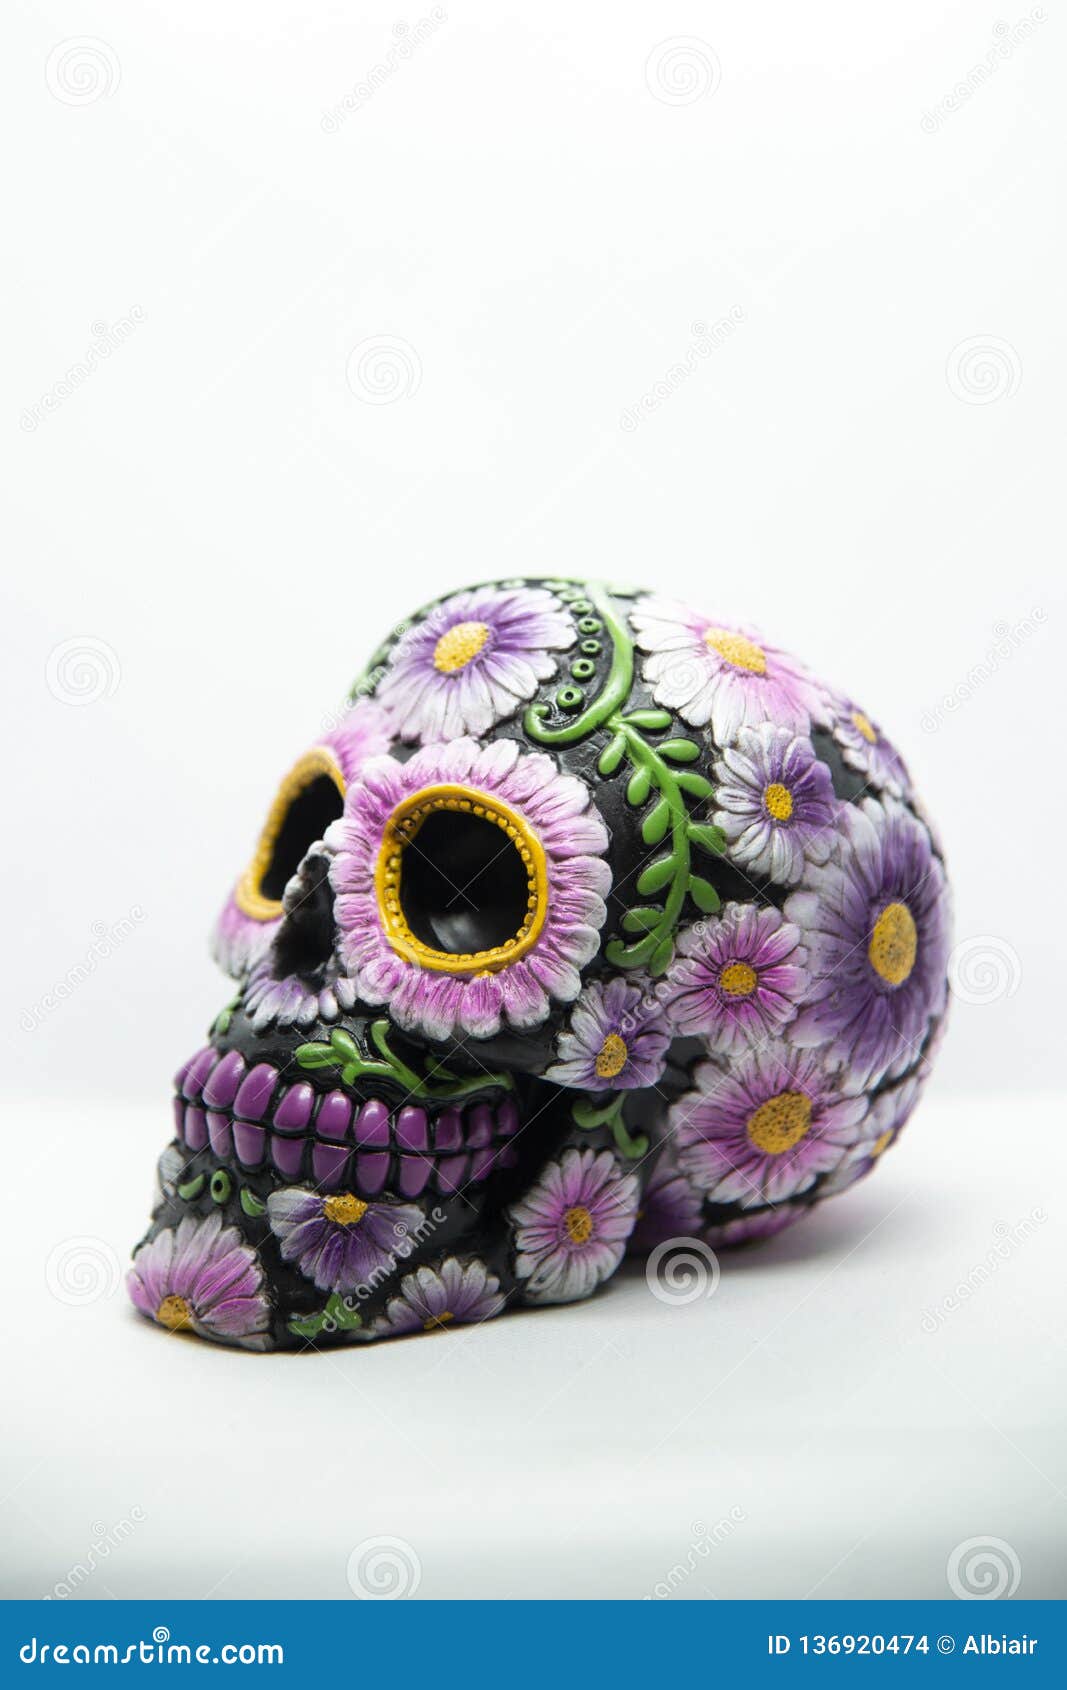 mexican calavera, with floral decorations